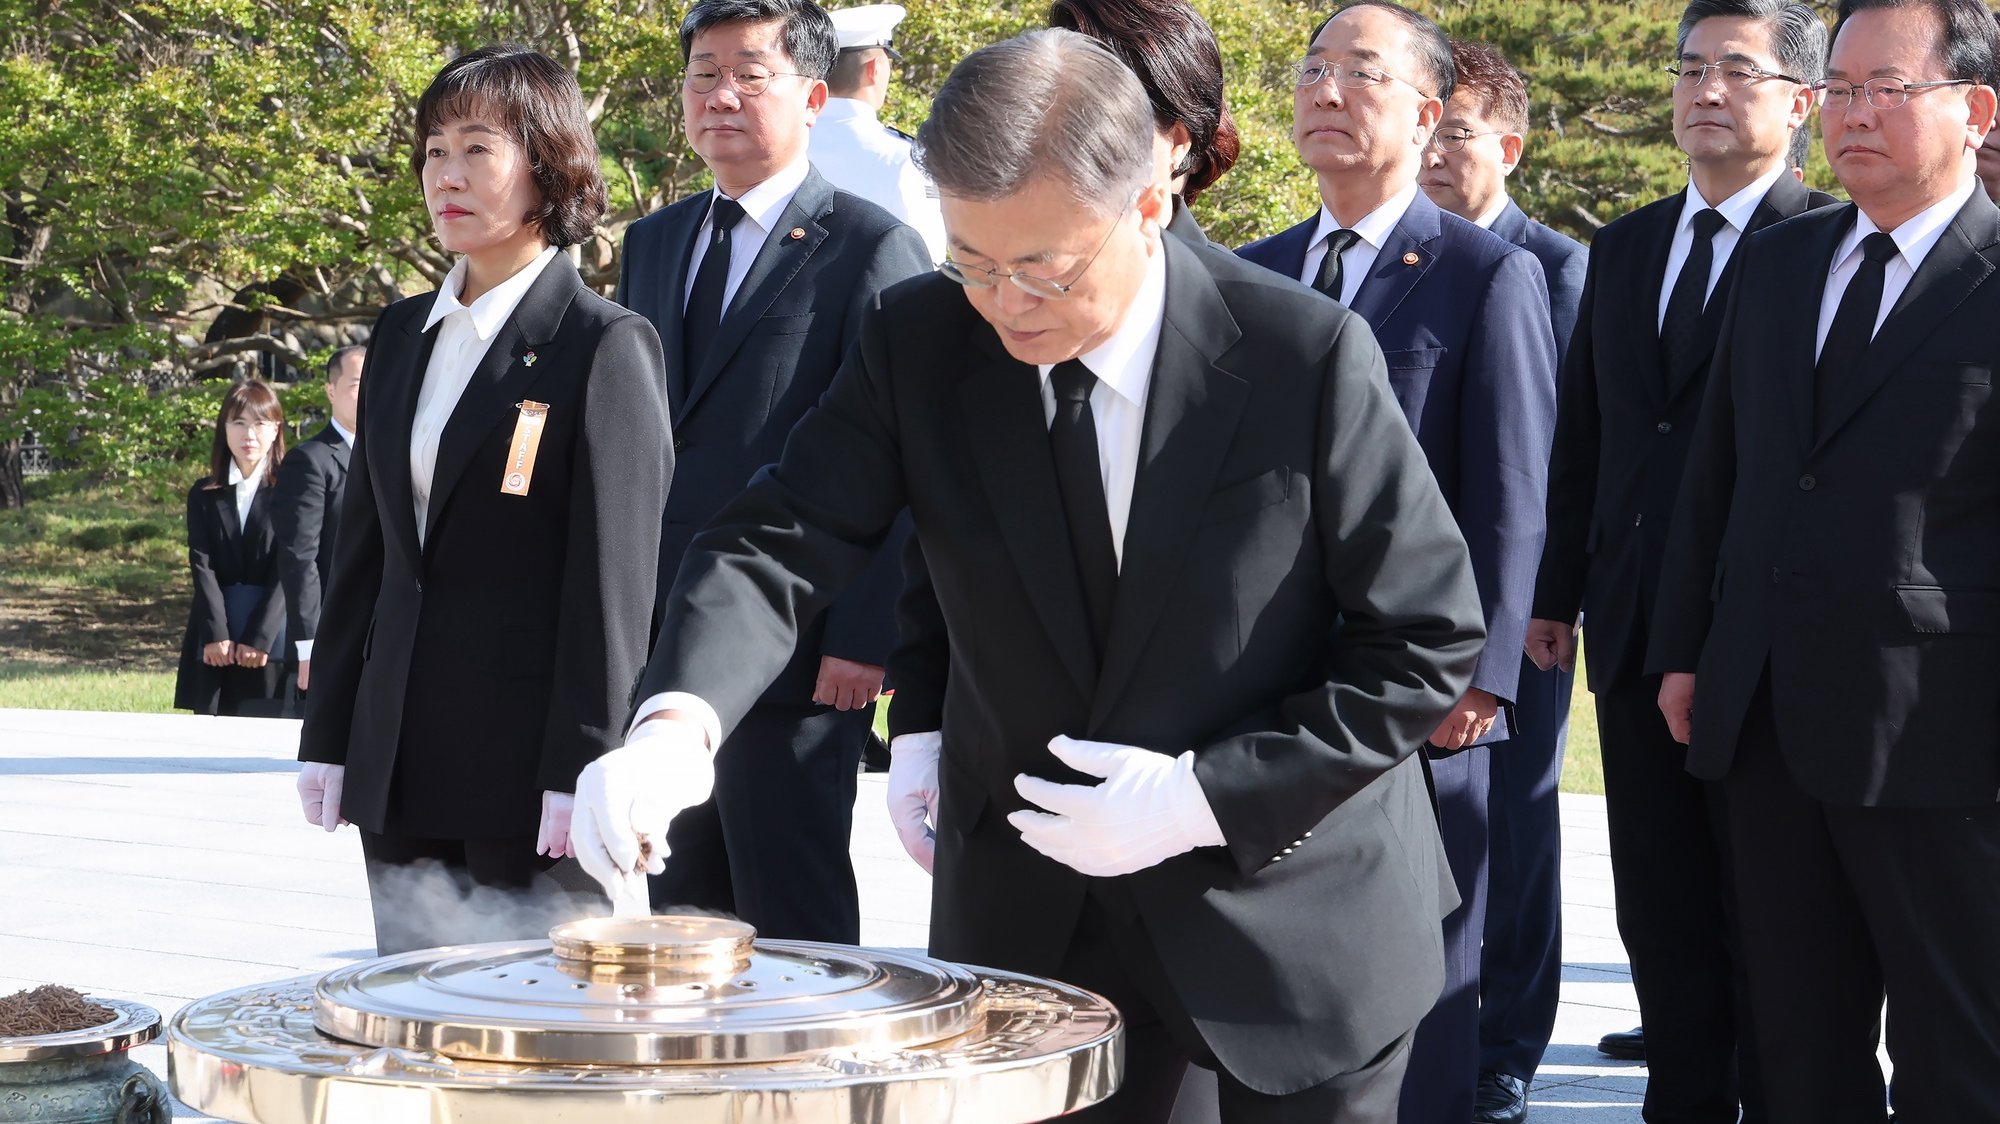 epa09934873 Outgoing South Korean President Moon Jae-in (C) burns incense to pay tribute to South Korean patriotic martyrs and war dead at the National Cemetery in Seoul, South Korea, 09 May 2022. Moon&#039;s single five-year term is set to end, with the inauguration of Yoon Suk-yeol of the conservative People Power Party 10 May.  EPA/YONHAP SOUTH KOREA OUT